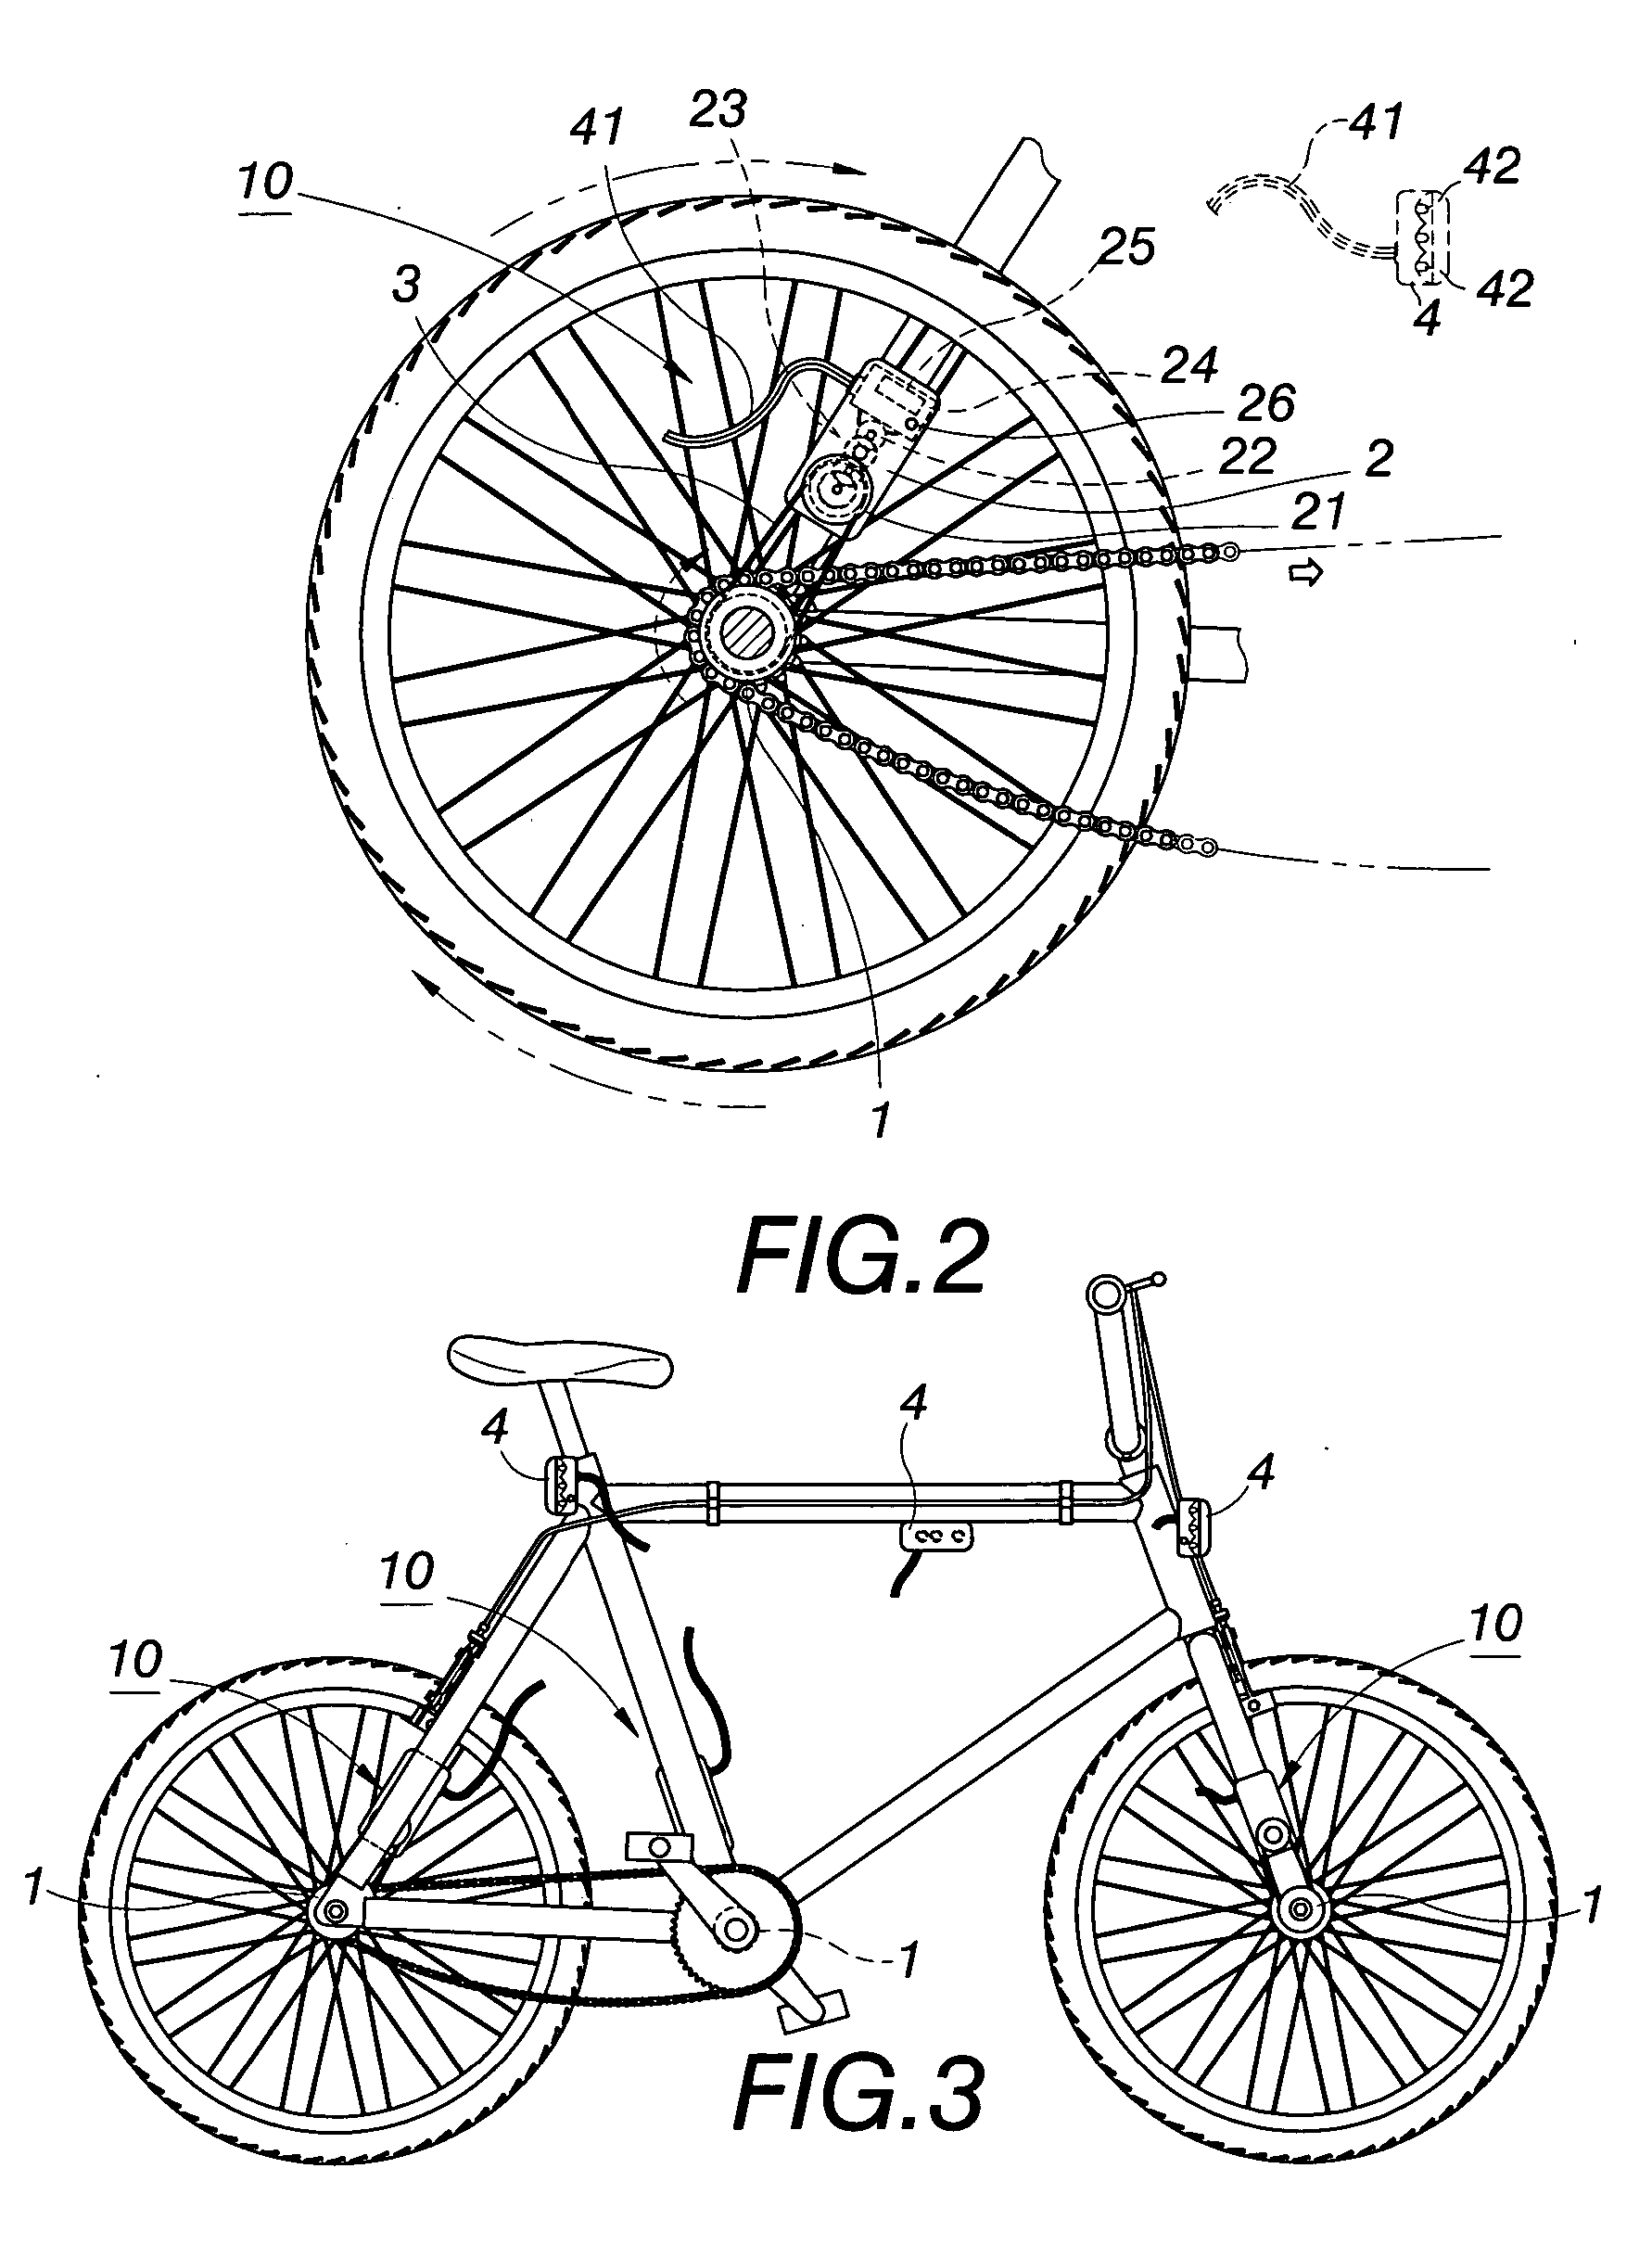 Emitting light device for bicycles